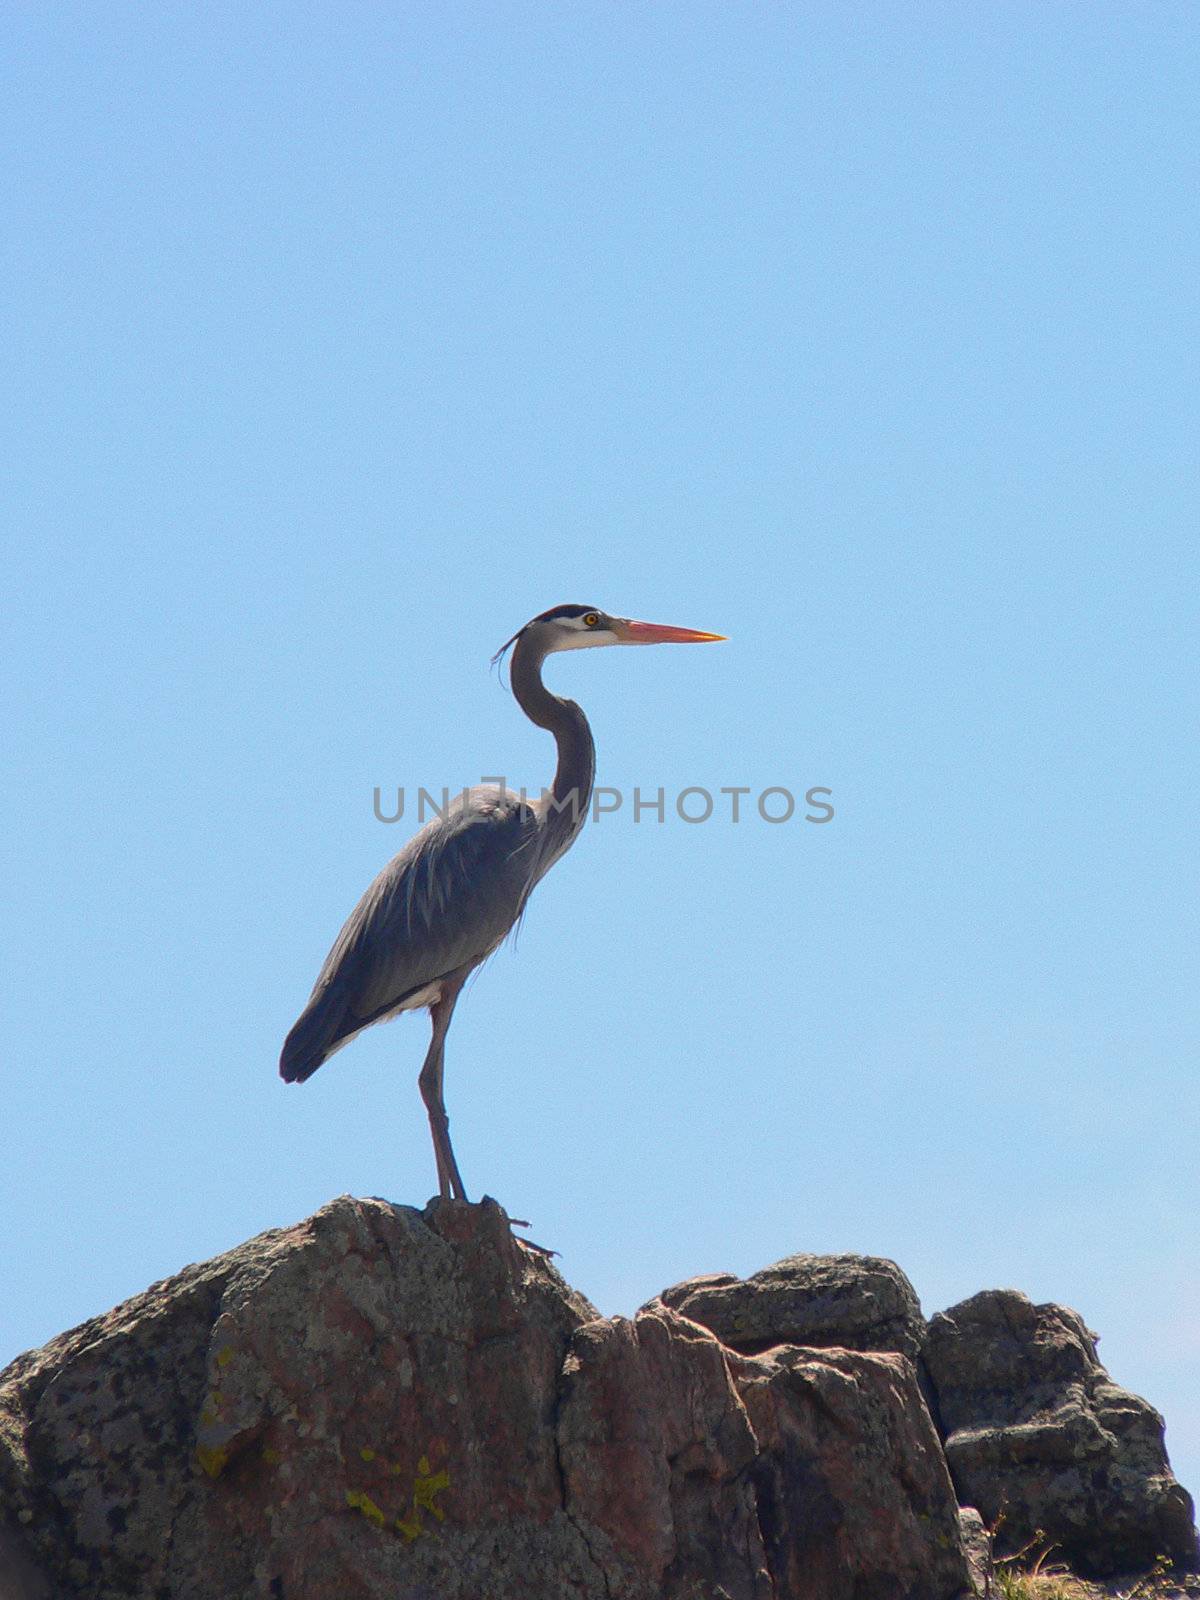 A Great Blue Heron standing on a rock waiting and watchful. 